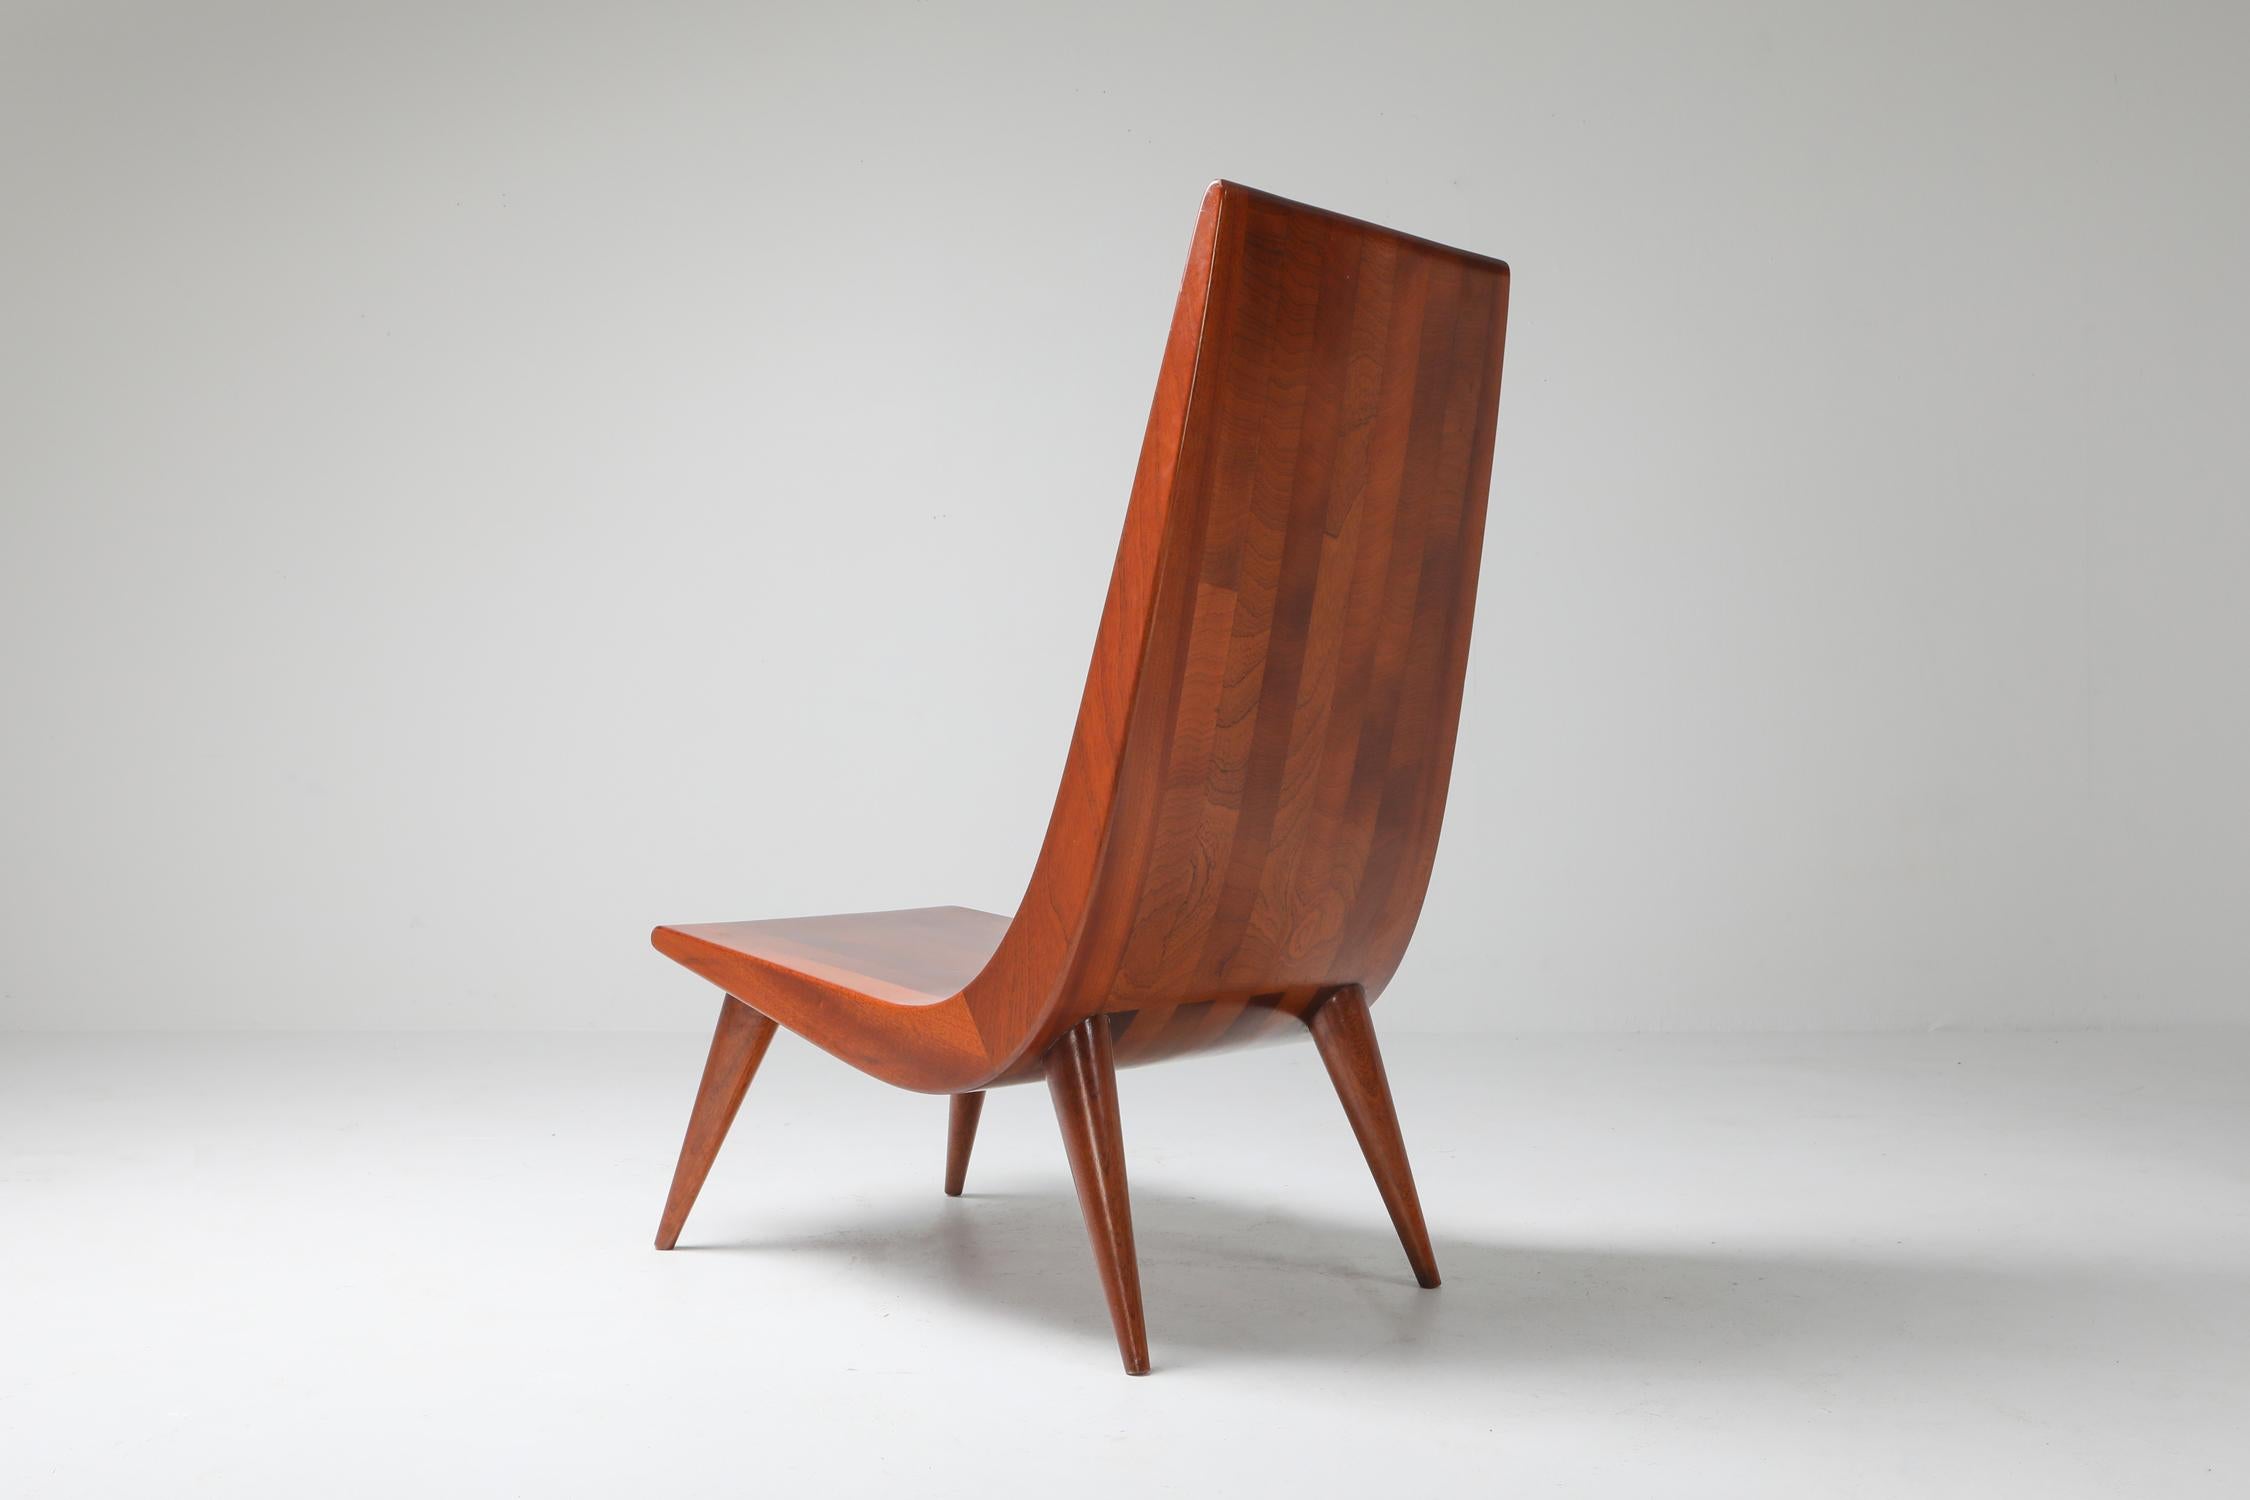 Mid-Century Modern solid wood pair of lounge chairs, Brazil, 1970s

Zanine Caldas, Zalszupin, Tenreiro, Carlo Hauner, Niemayer are many of the great Brazilian modern designers of the 20th century.
These pieces fit their style and quality.

  